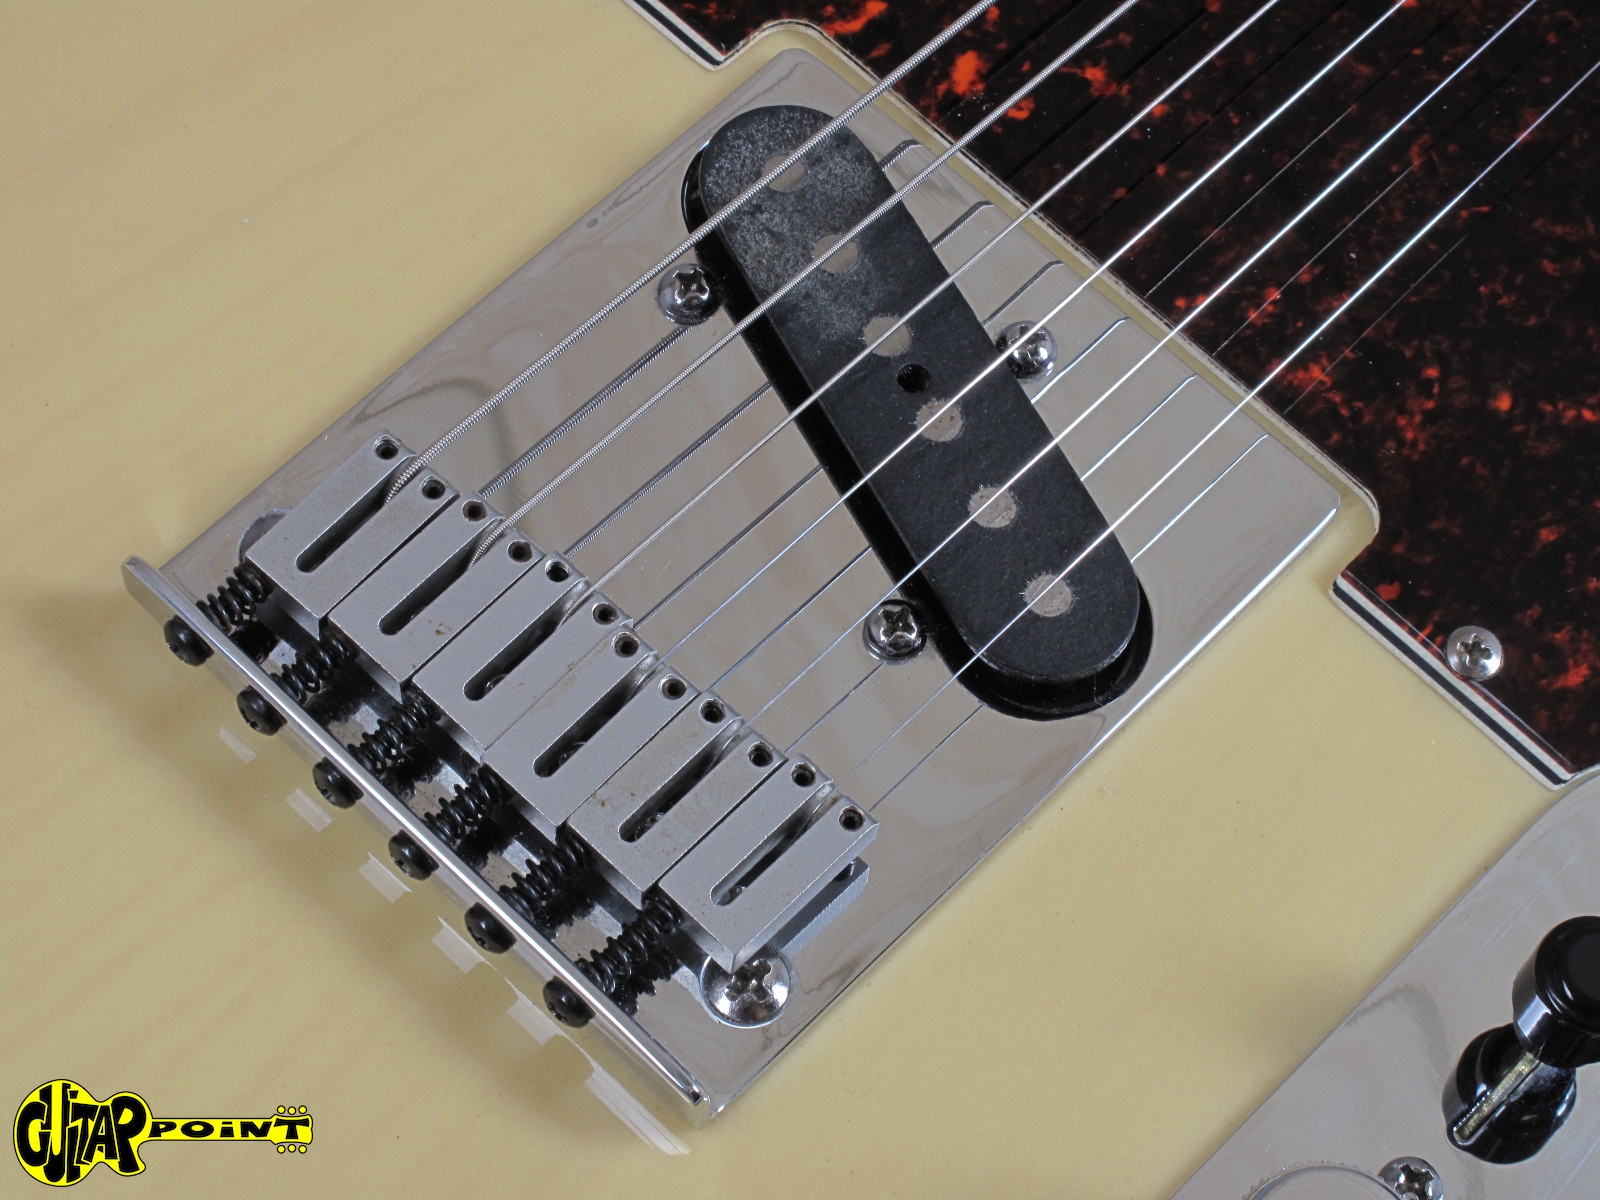 1994 Fender Telecaster Special Edition – Blond – GuitarPoint